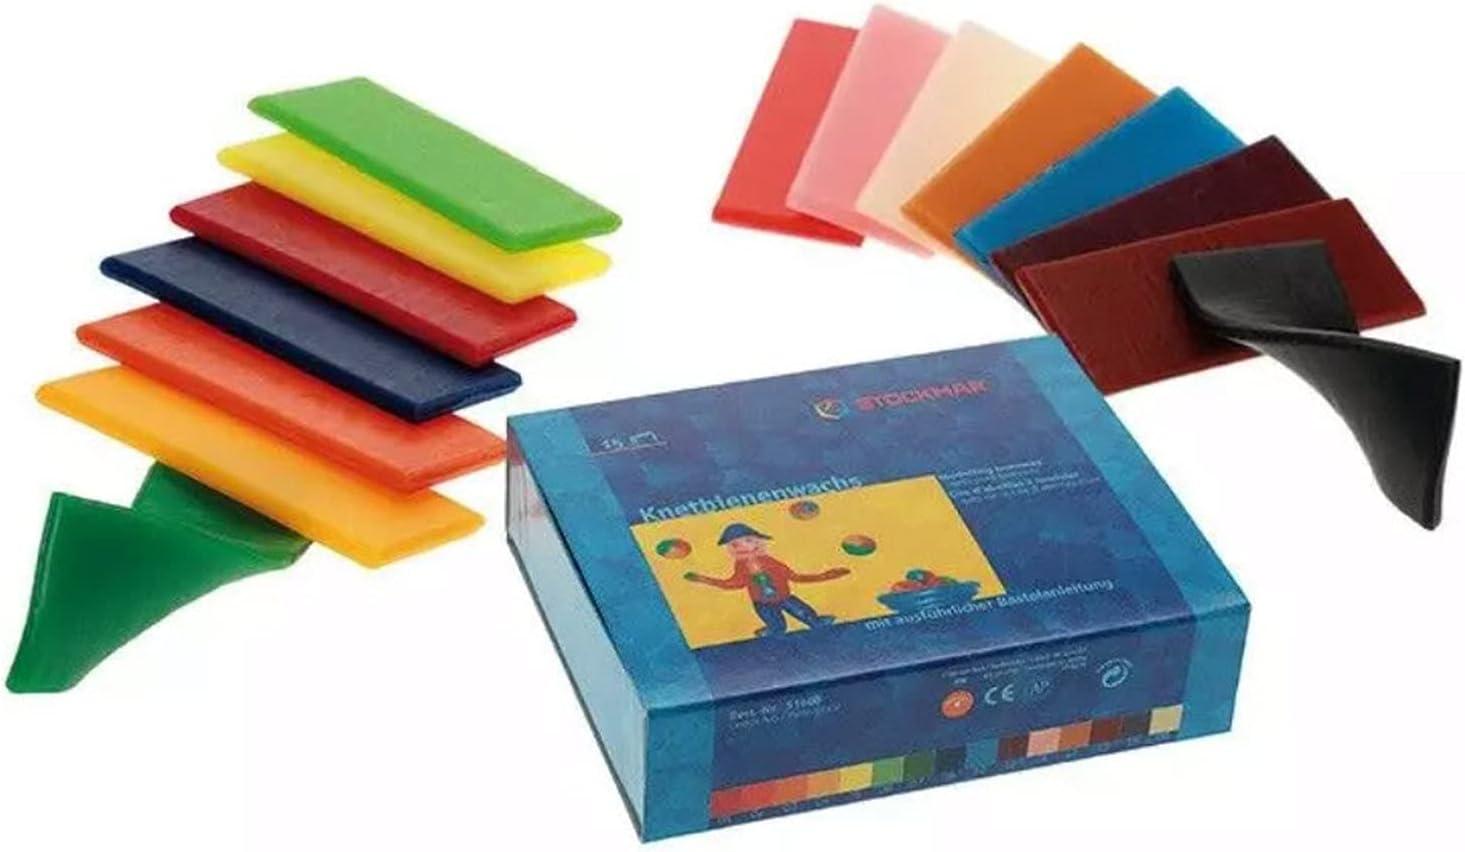 Stockmar Modelling Beeswax Box - 6 Assorted Colors